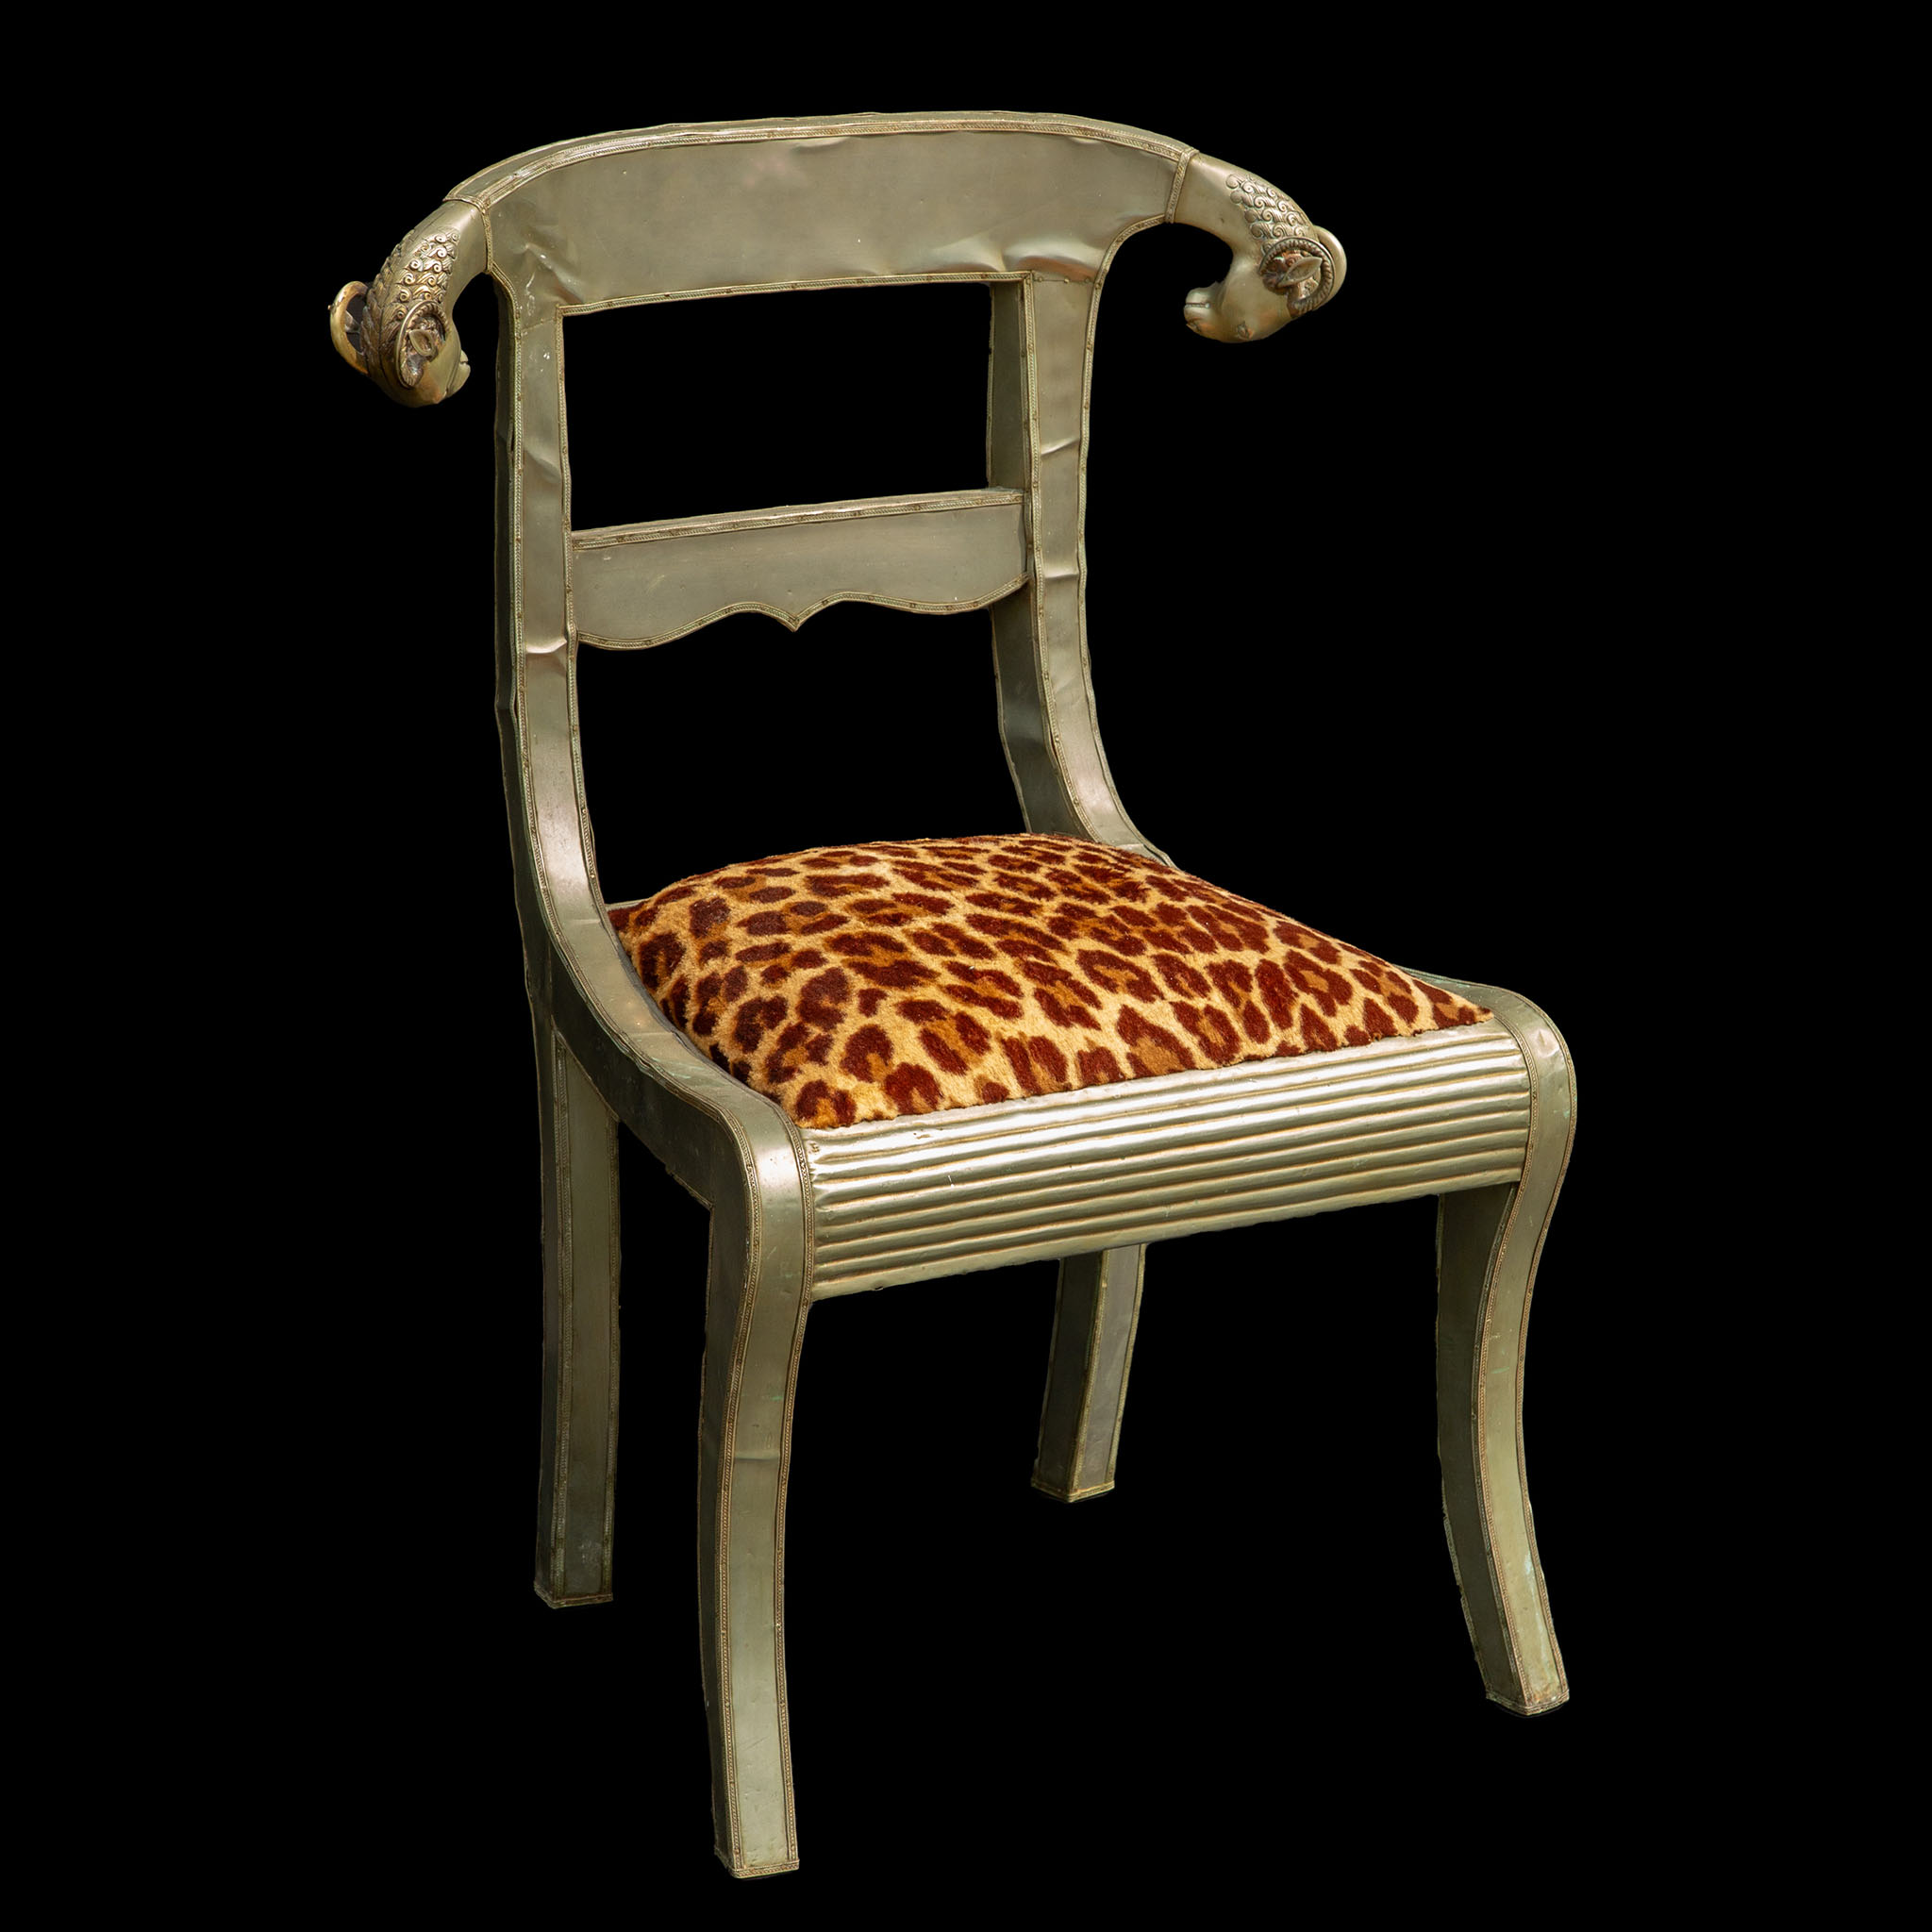 Vintage Anglo, Indian Rams Head Chair with Leopard Fabric